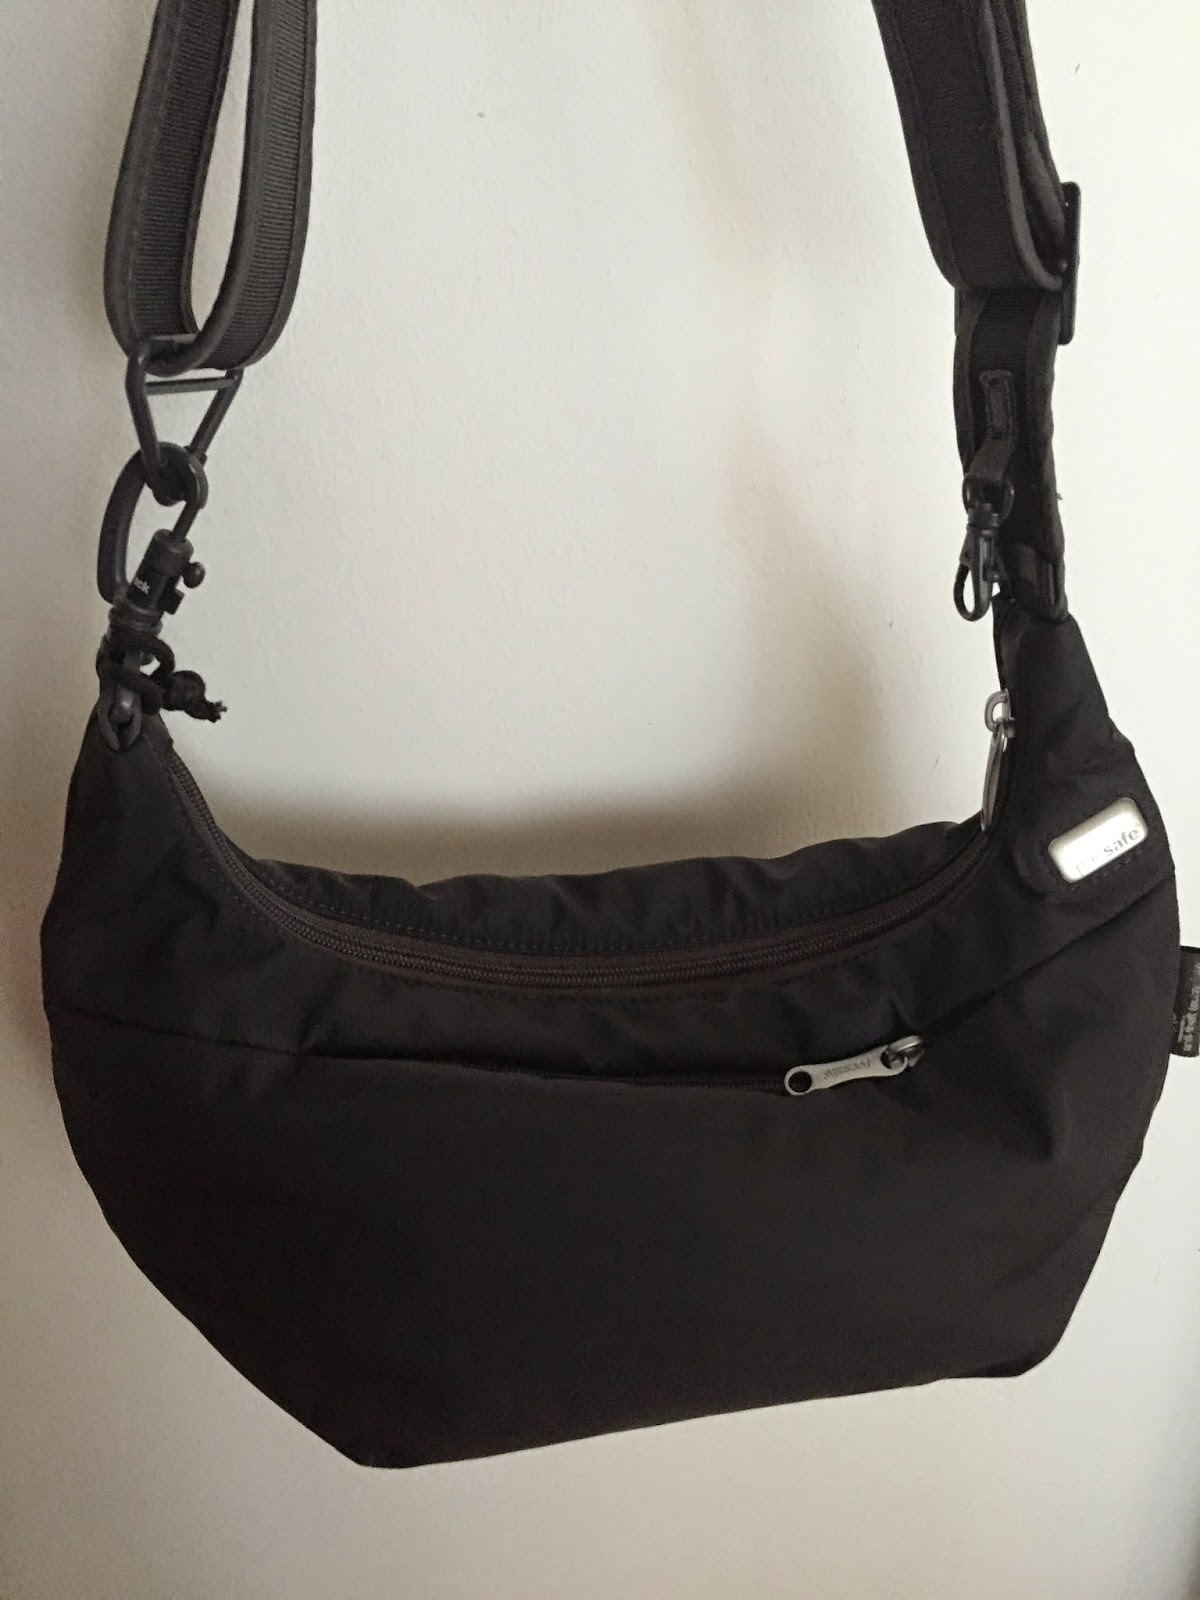 Joyce Leong: Review of Pacsafe Pick-pocket proof bags